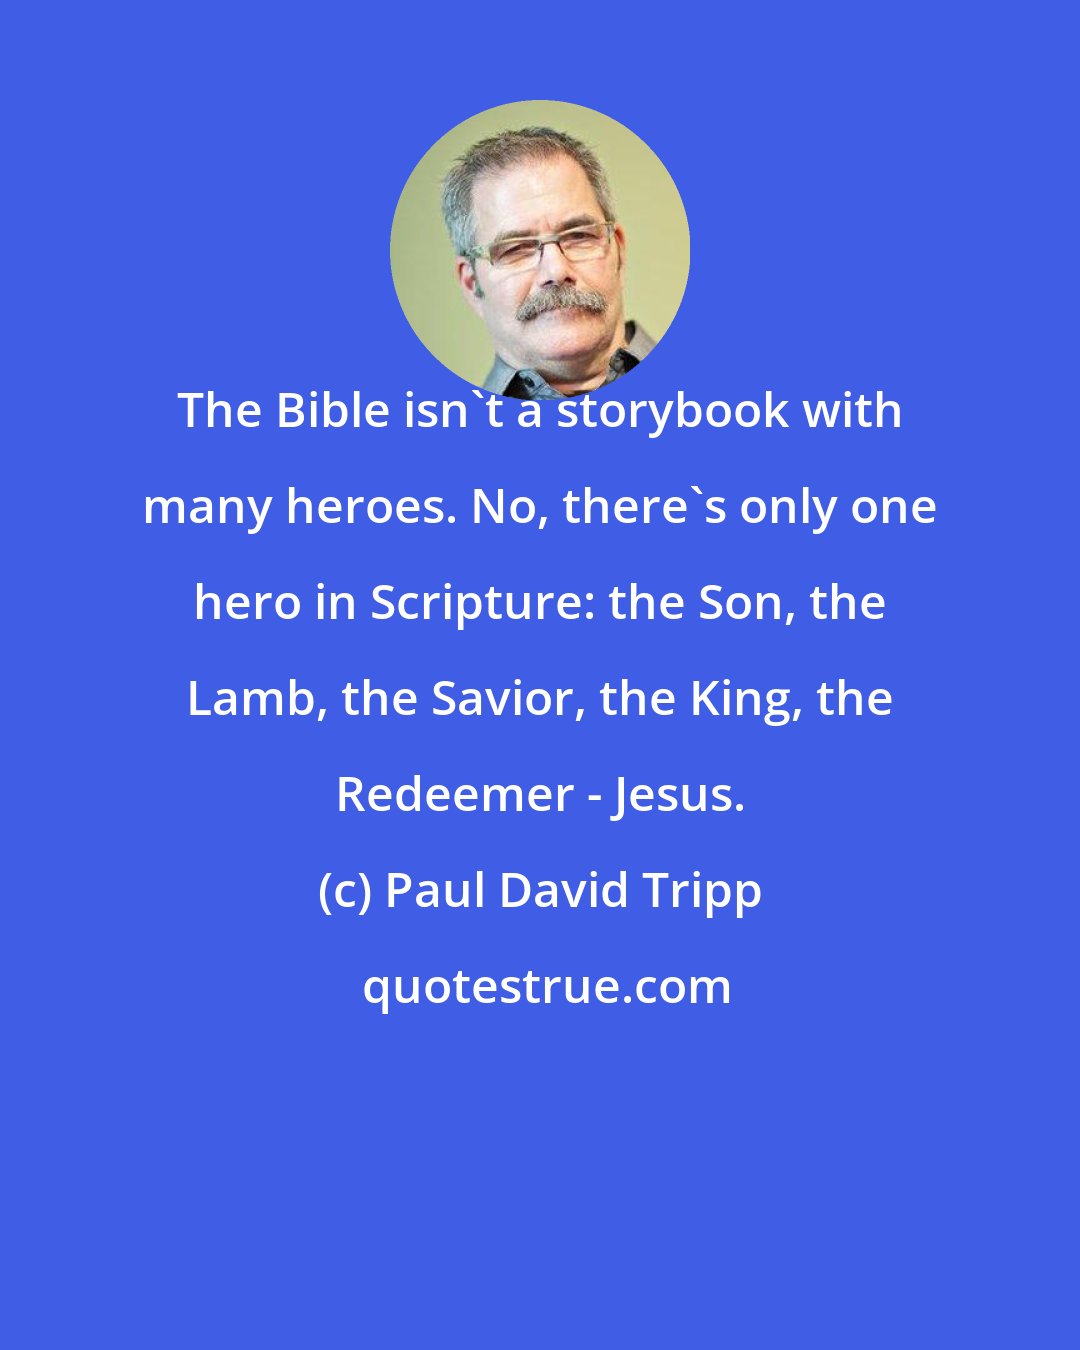 Paul David Tripp: The Bible isn't a storybook with many heroes. No, there's only one hero in Scripture: the Son, the Lamb, the Savior, the King, the Redeemer - Jesus.